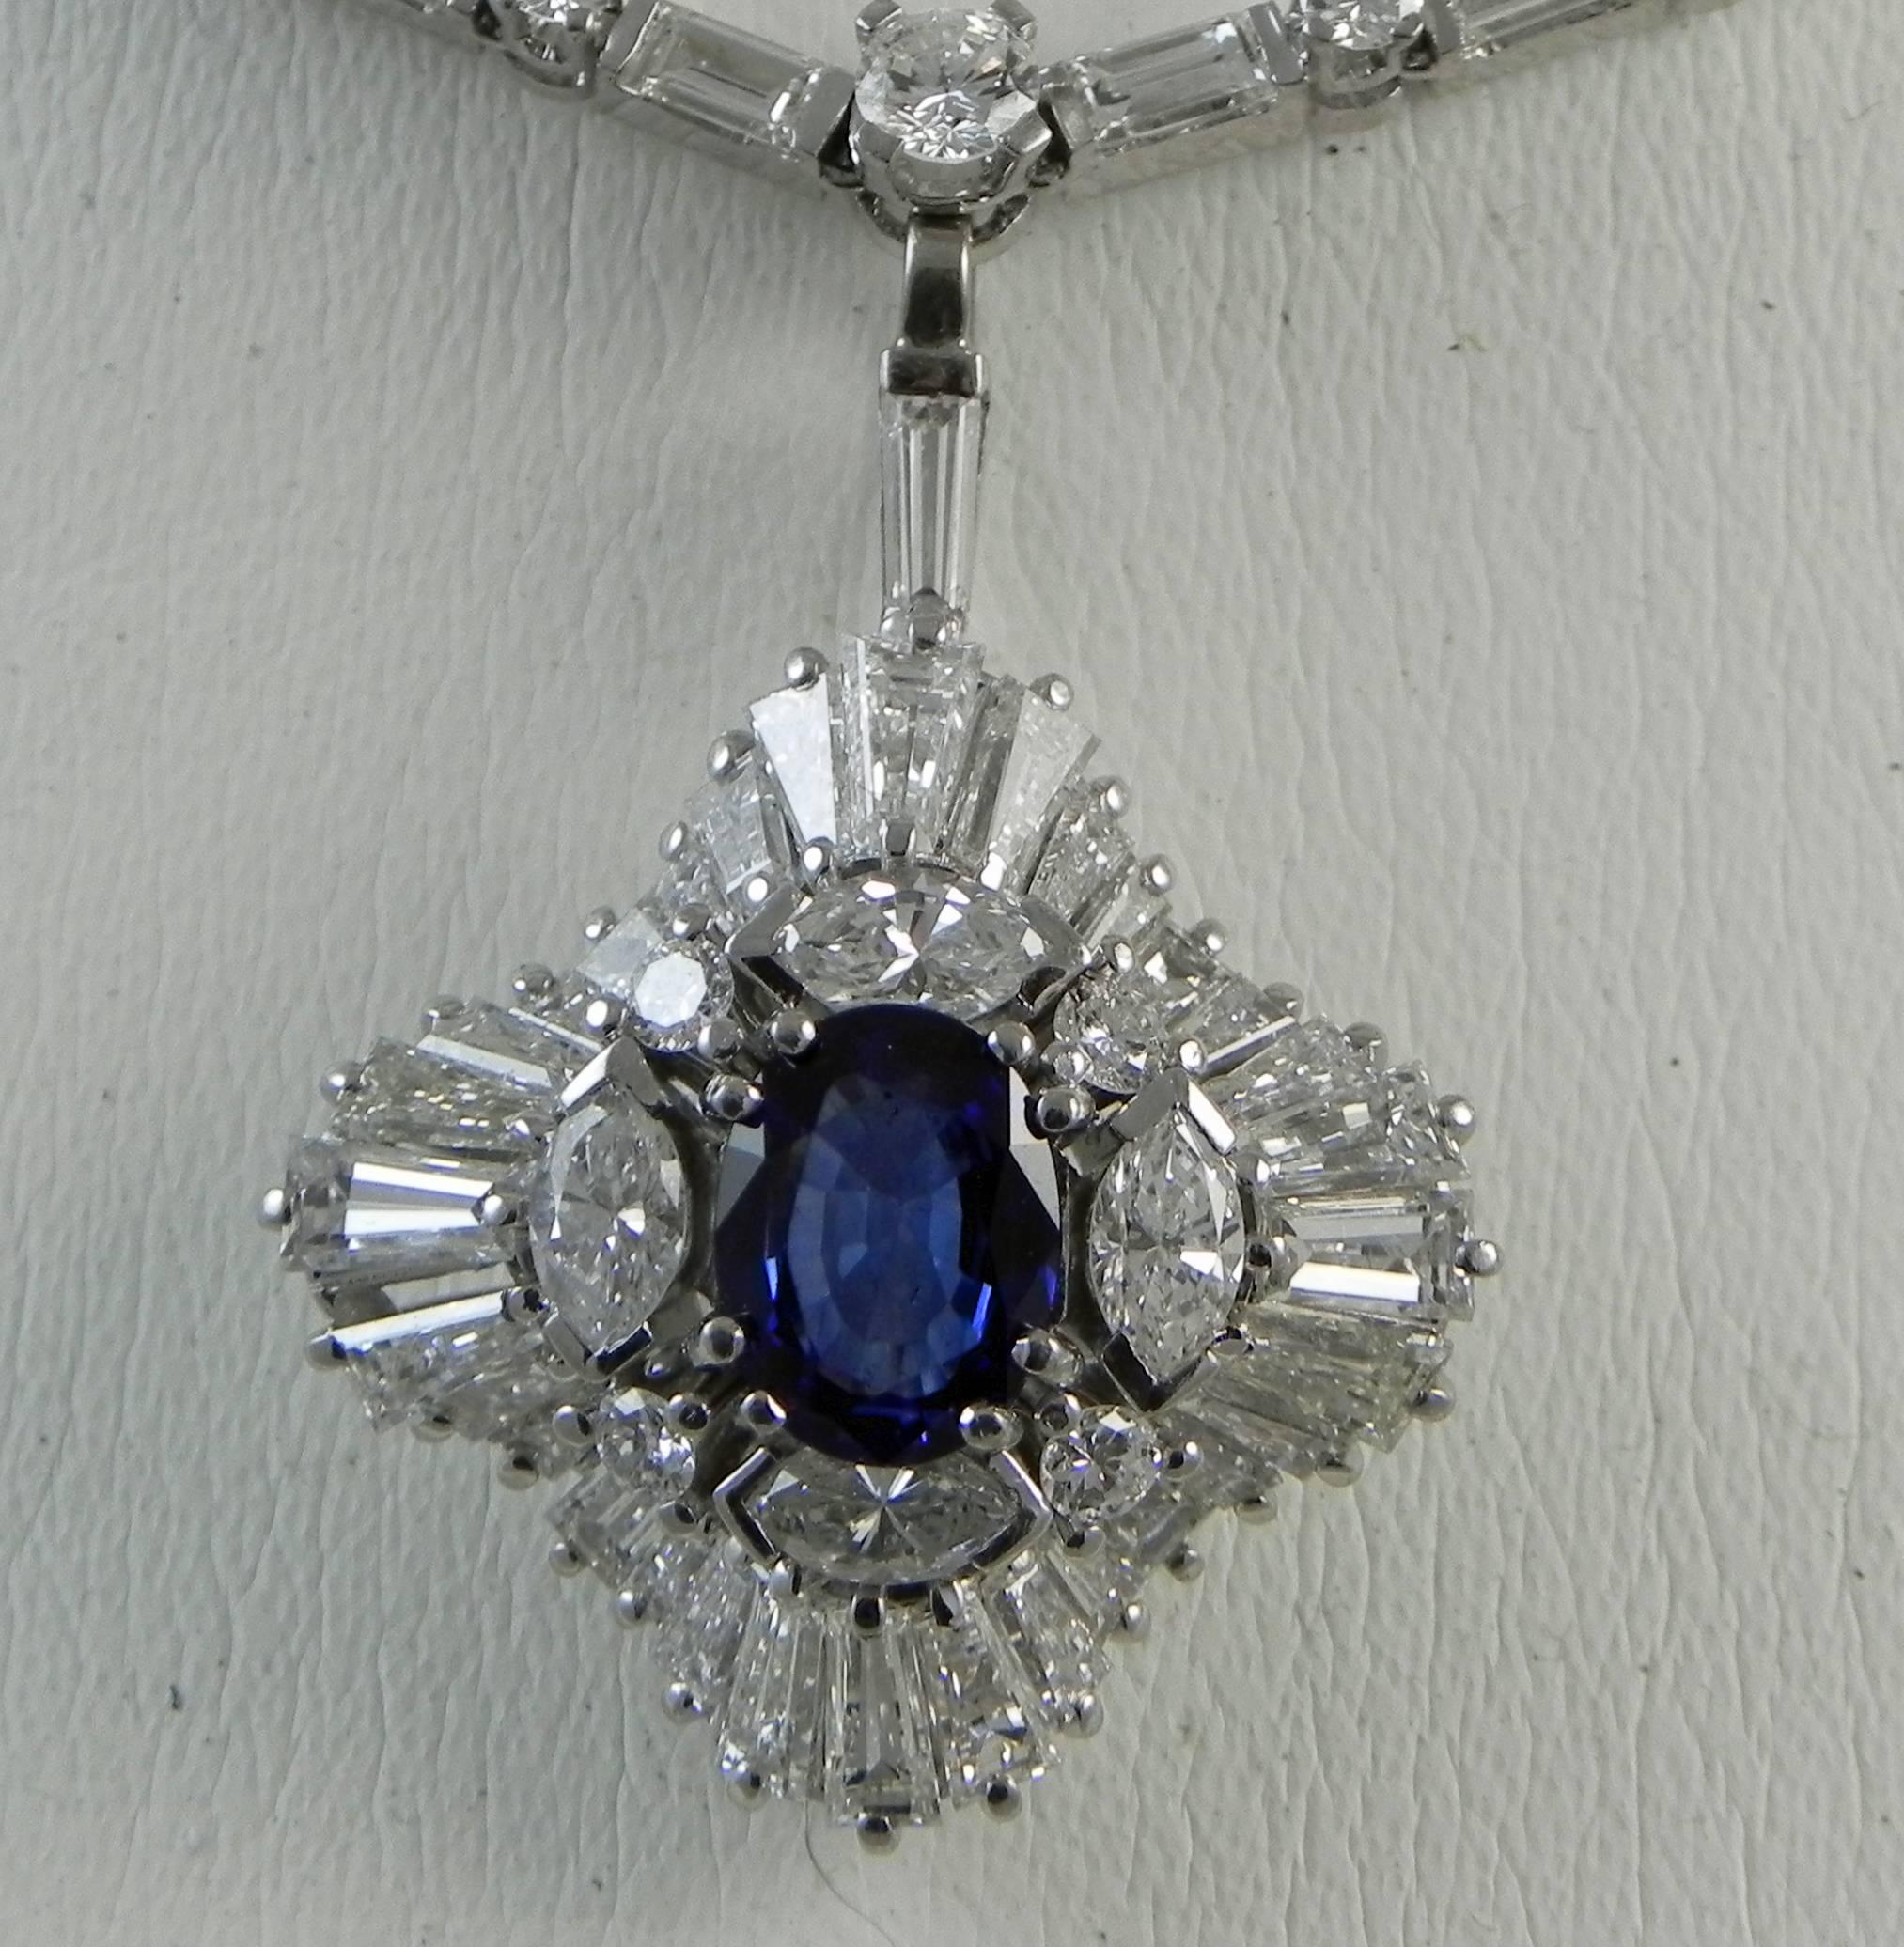 A platinum/10% iridium handmade neck piece by Colorado's premier jewelry studio and master craftsman-Steven M. Parks. The neck piece consists of two separate pieces, one that is the 16” chain consisting of 54 round brilliant and 56 straight